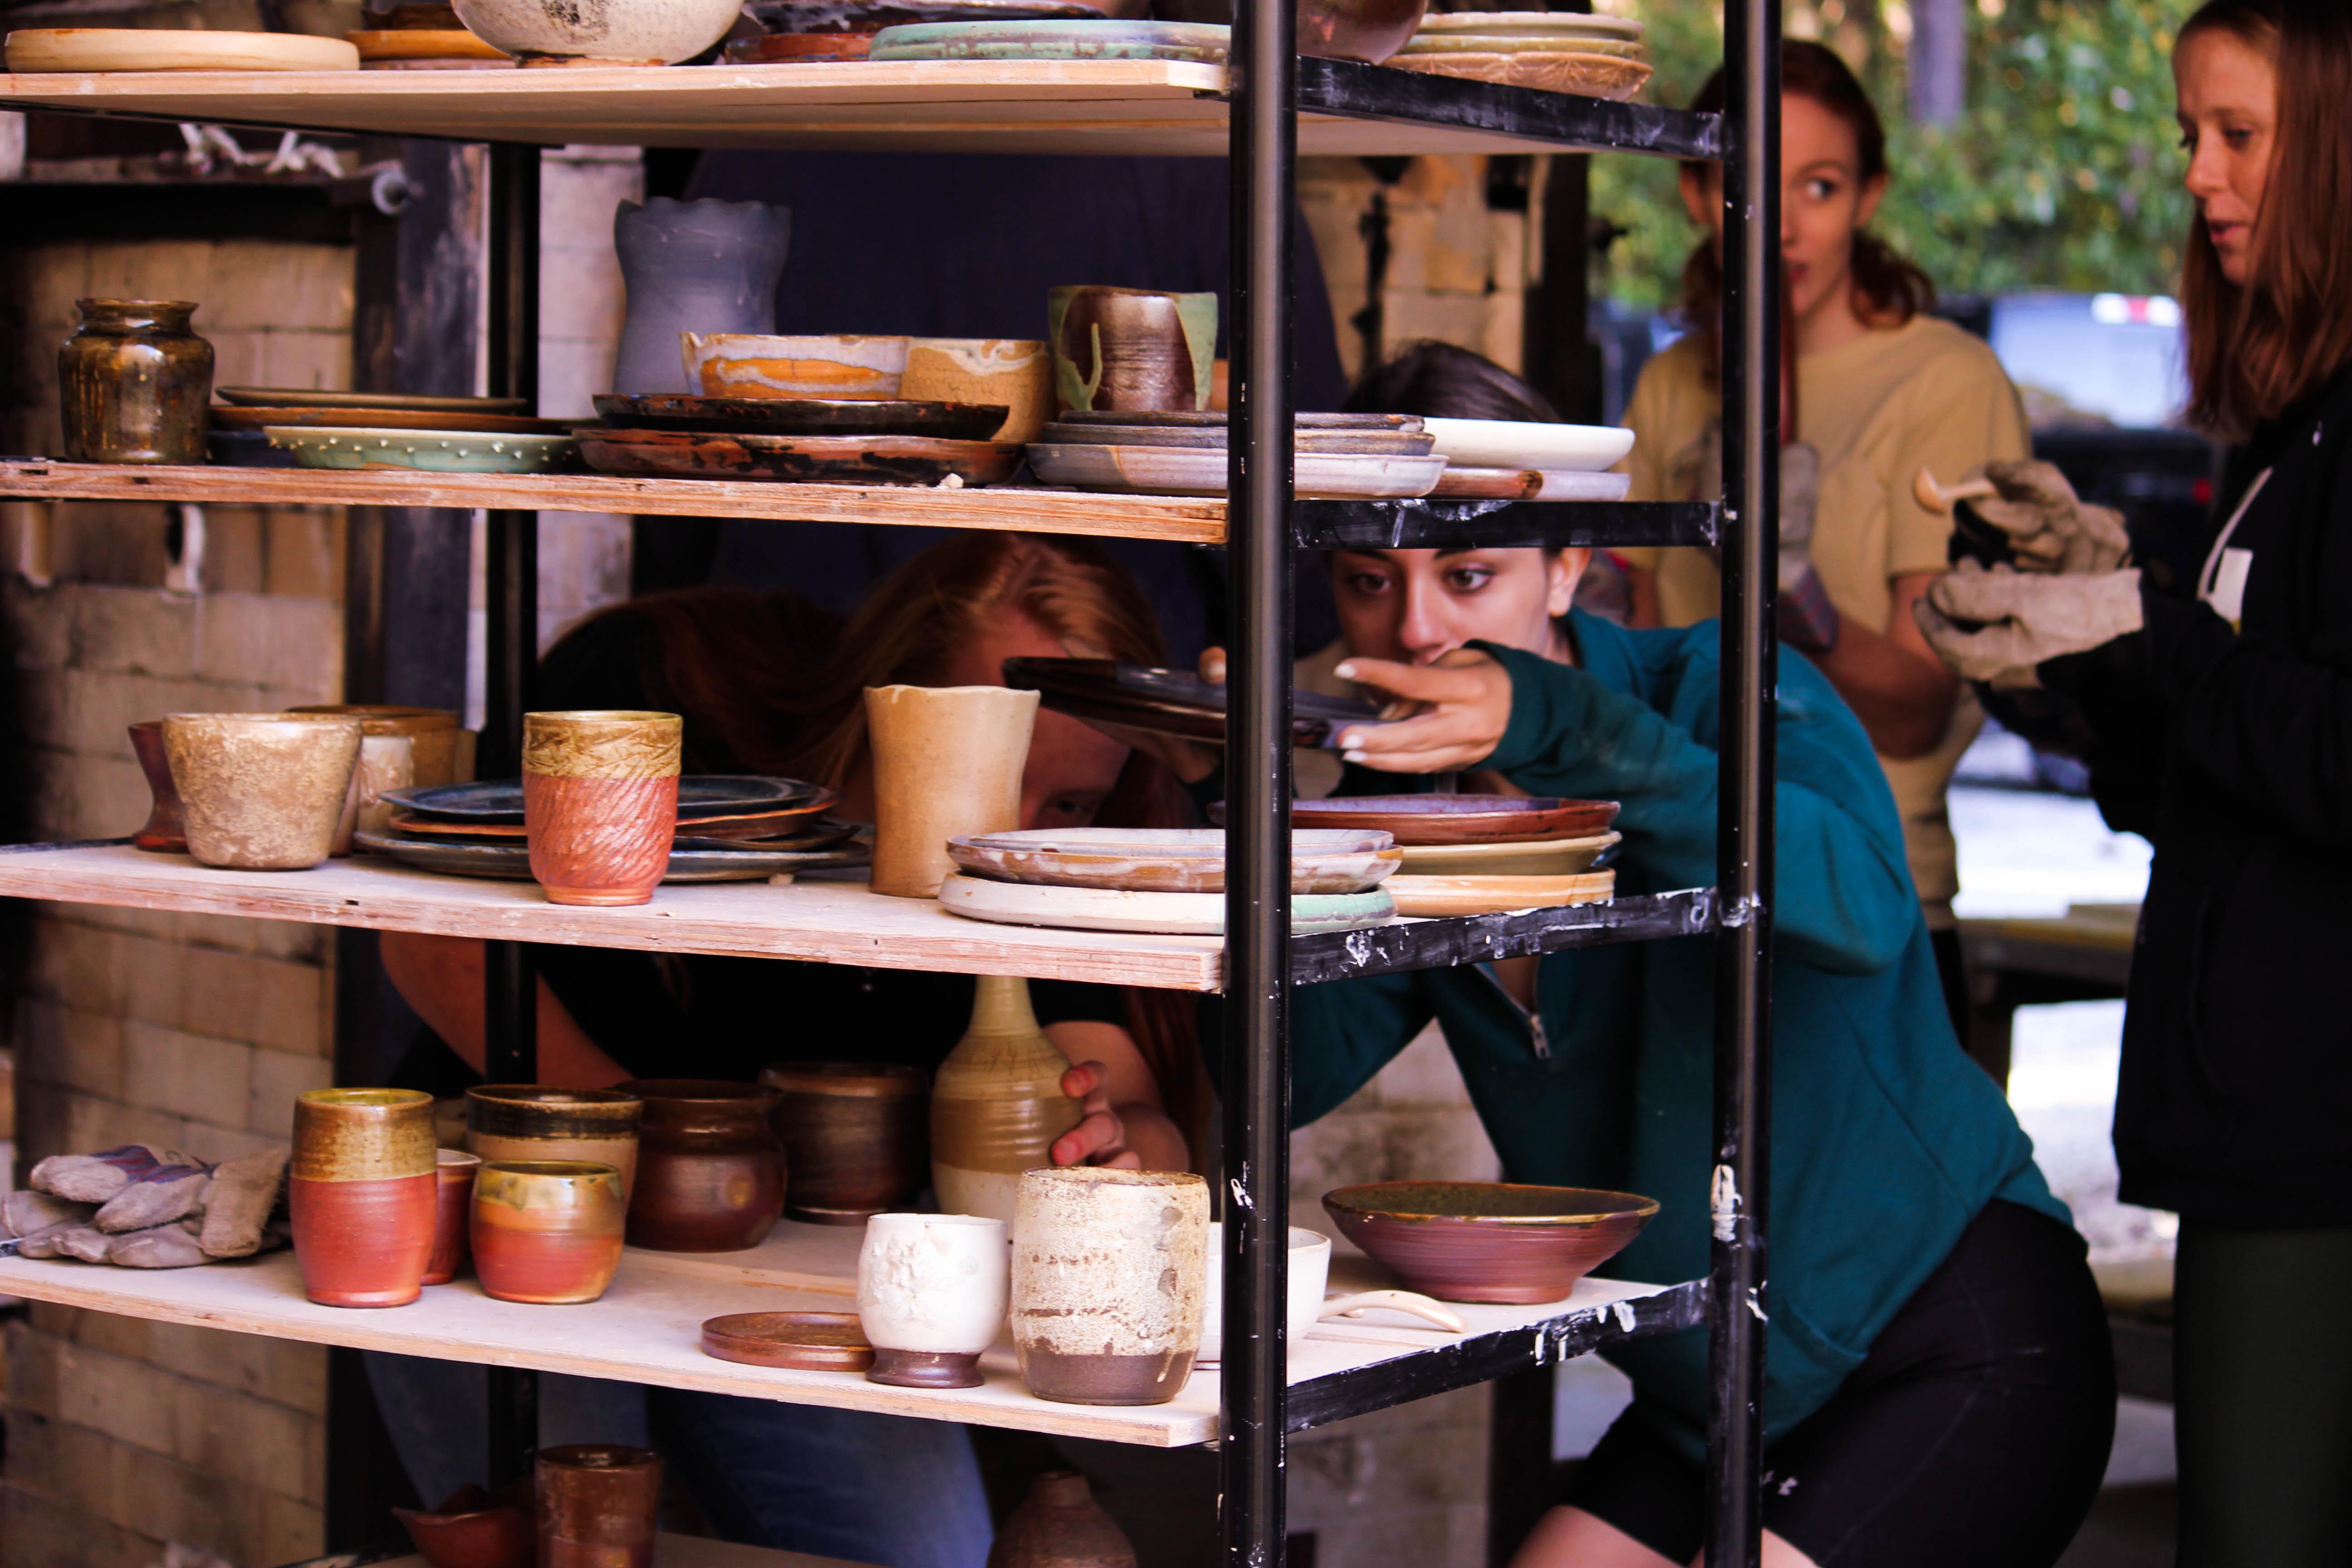 Ceramic students unloading a wood kiln and placing the artwork on transport ware cart shelves.